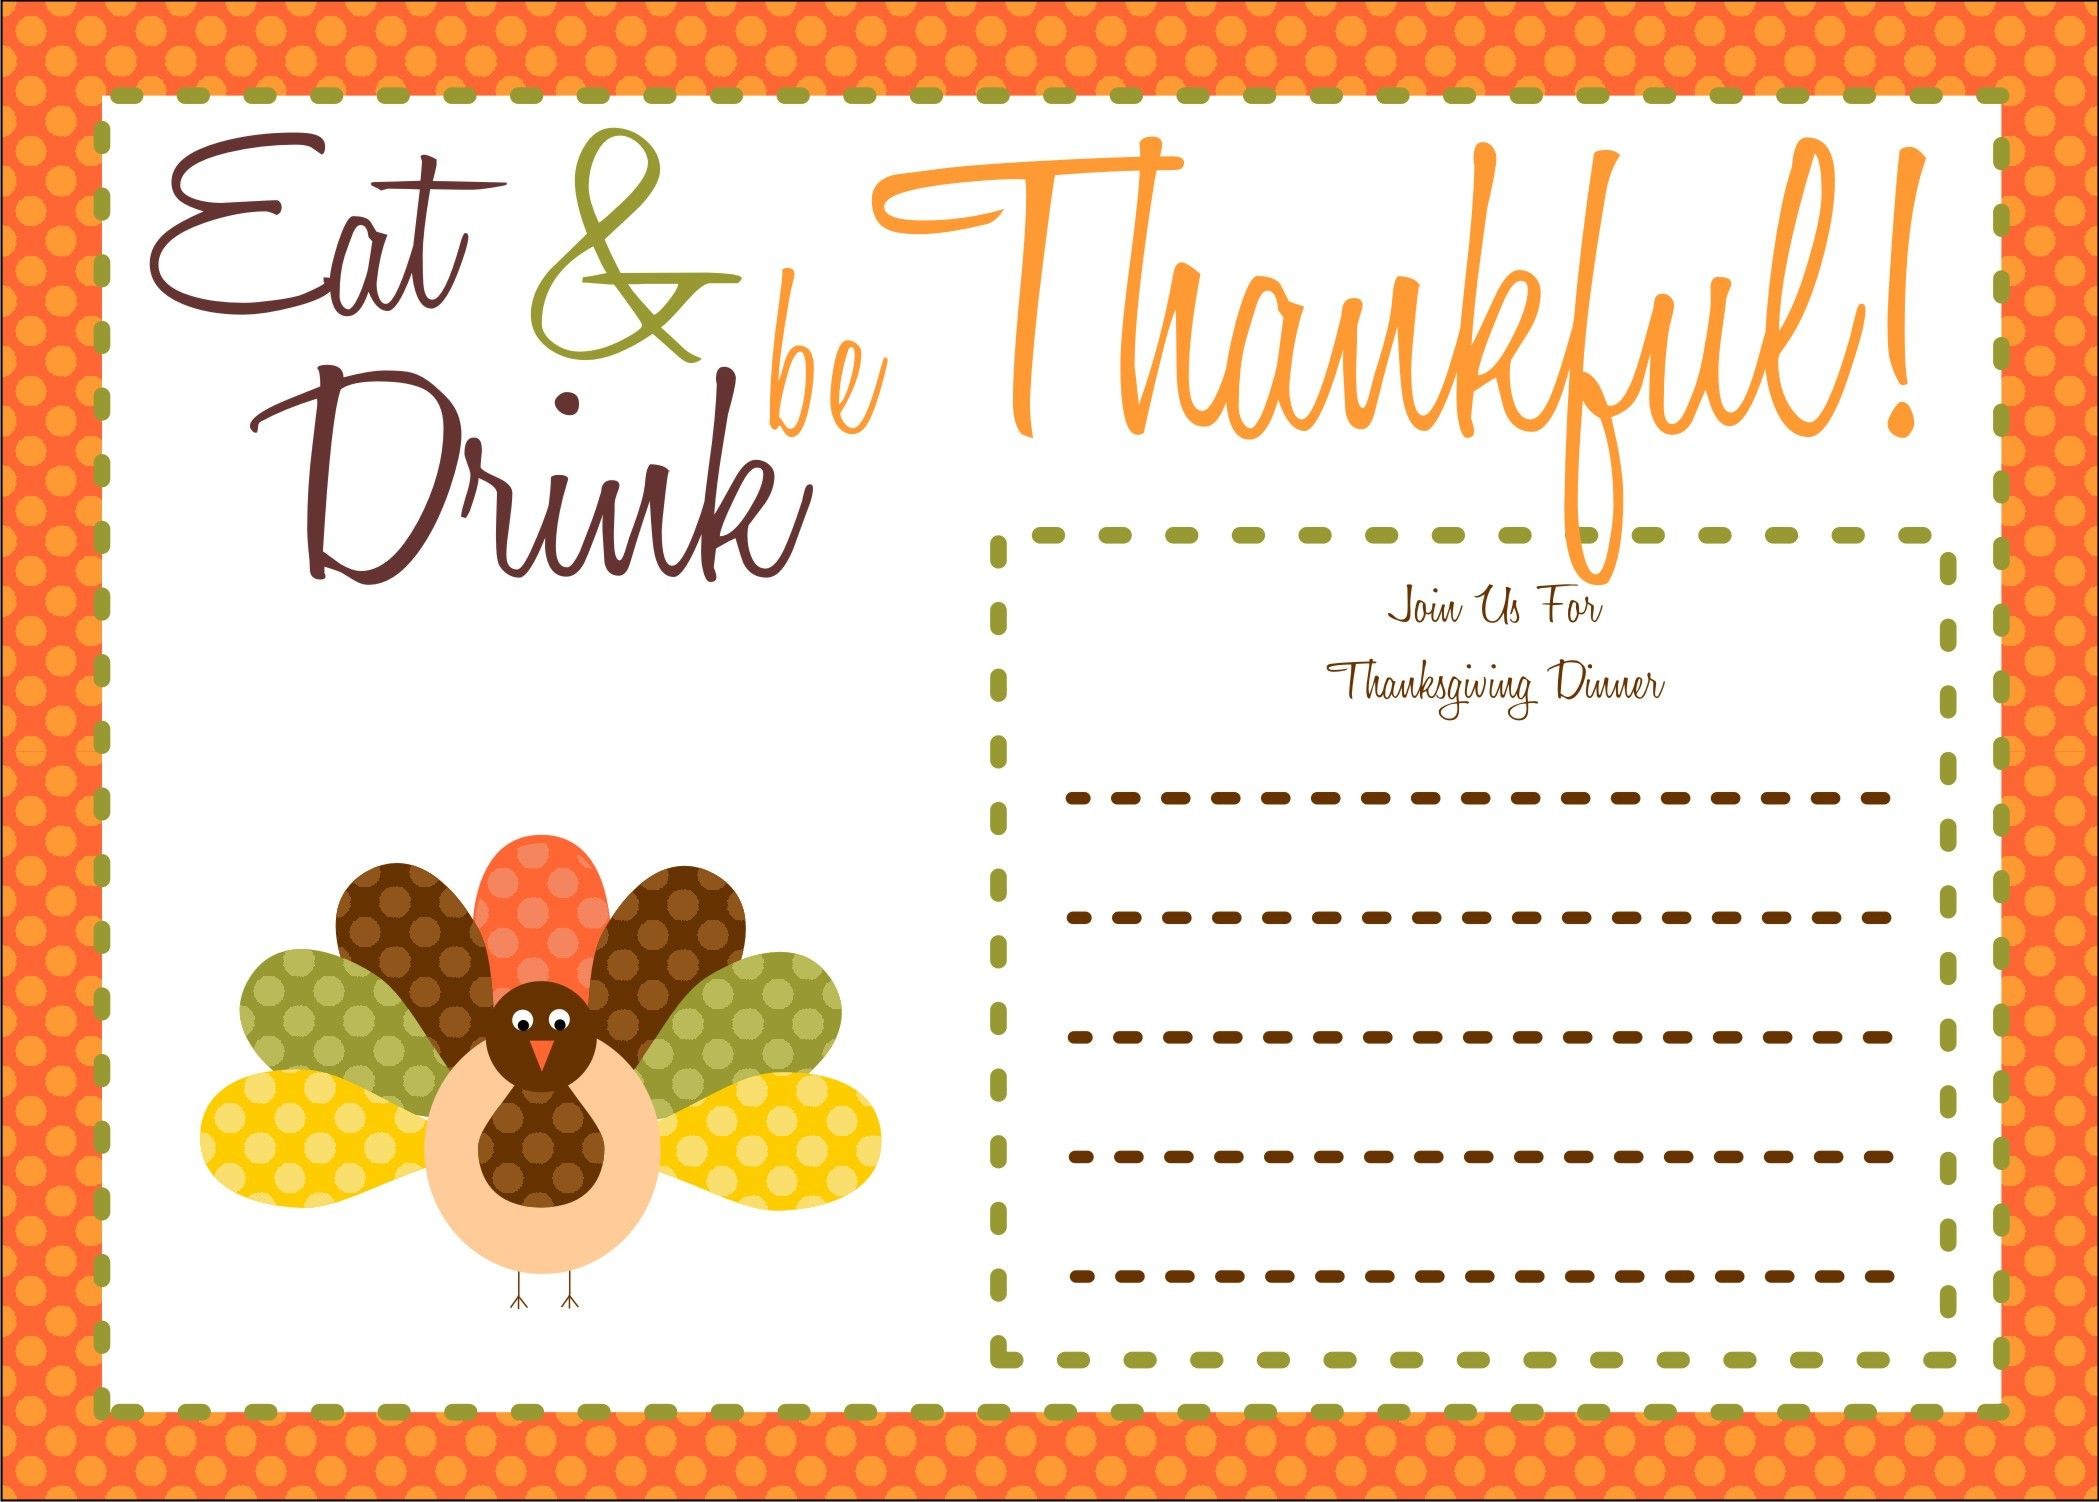 Free Thanksgiving Printables From The Party Bakery | Free Printables - Free Printable Thanksgiving Cards